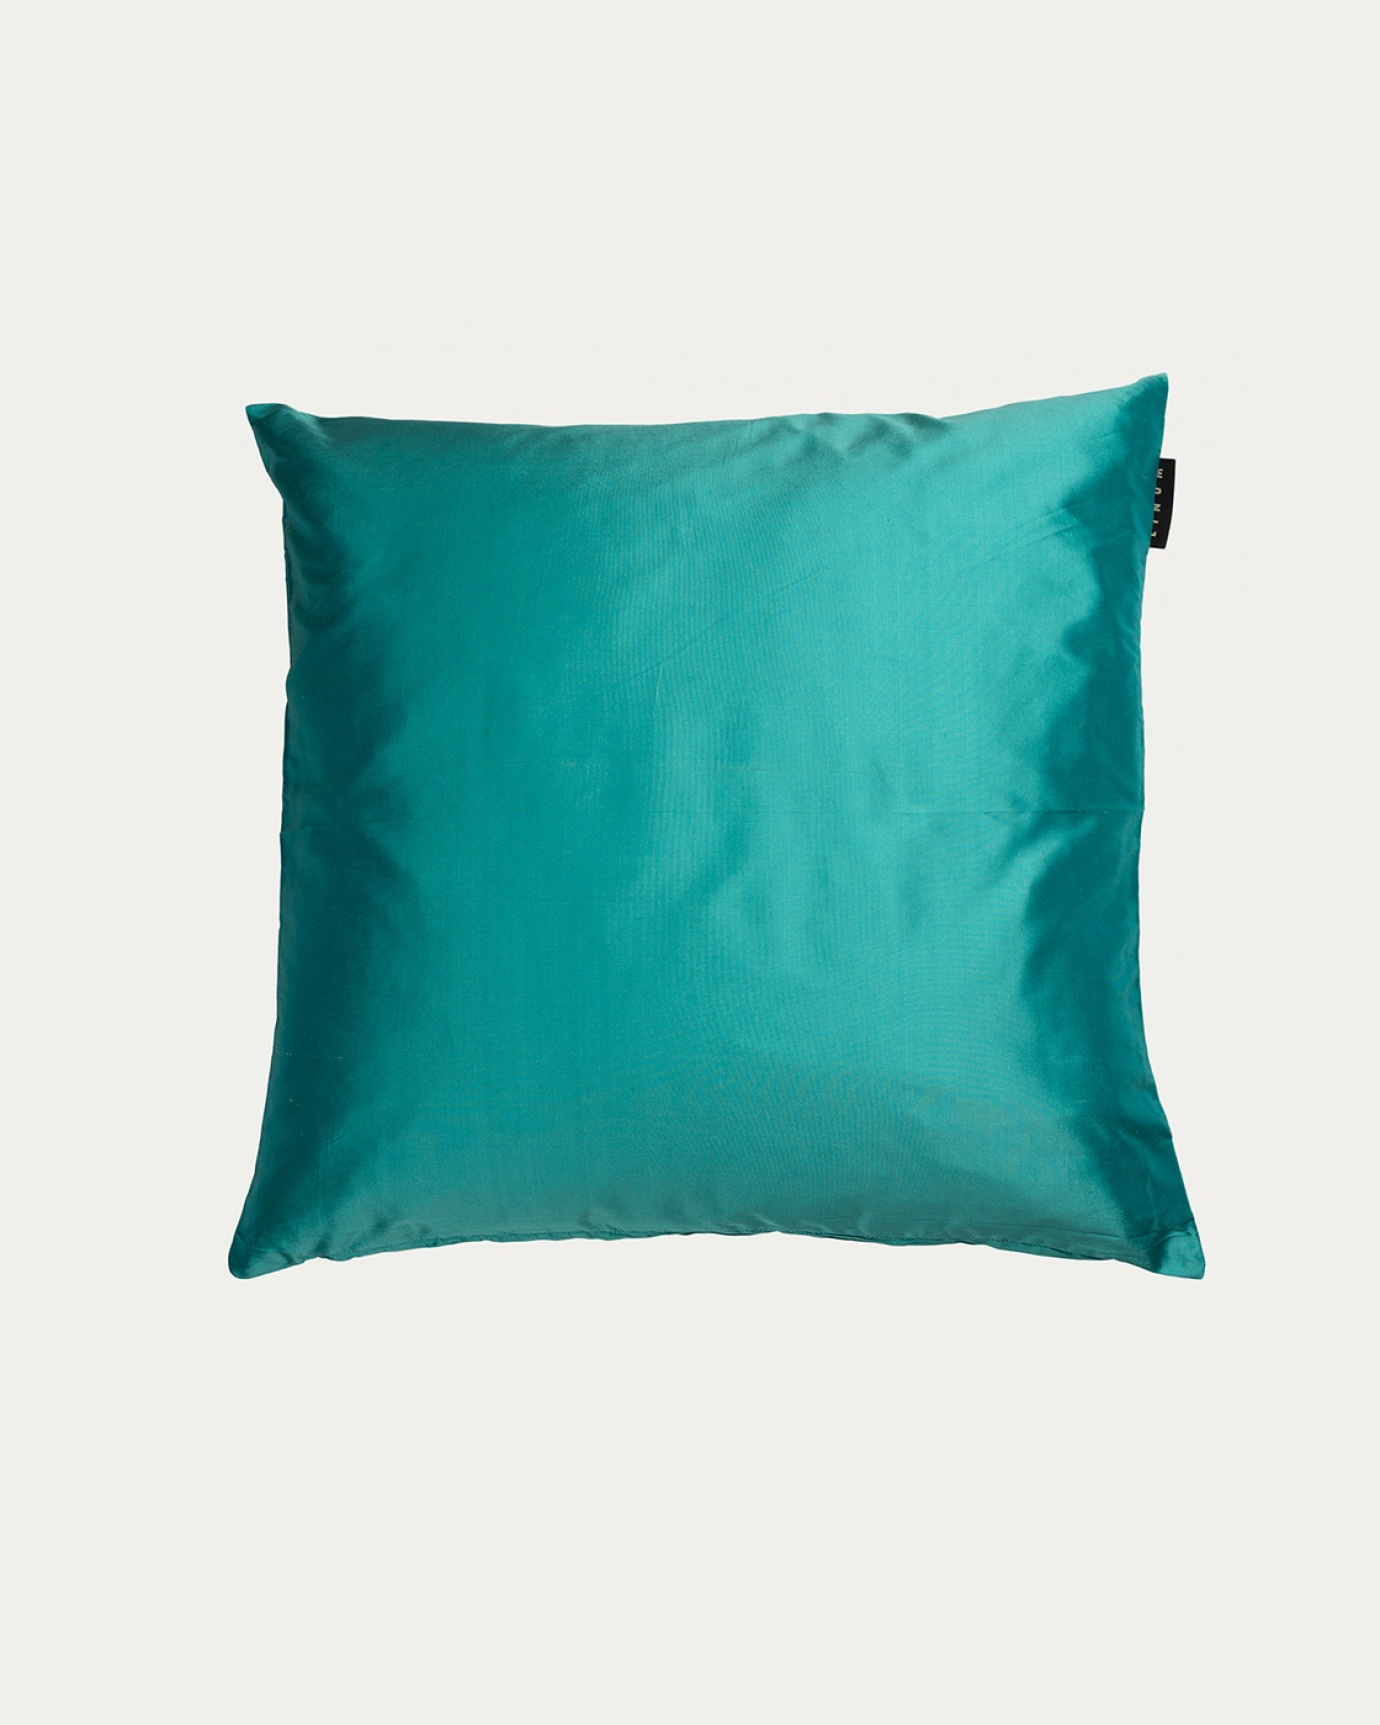 Product image turquoise DUPION cushion cover made of 100% dupion silk from LINUM DESIGN. Size 40x40 cm.